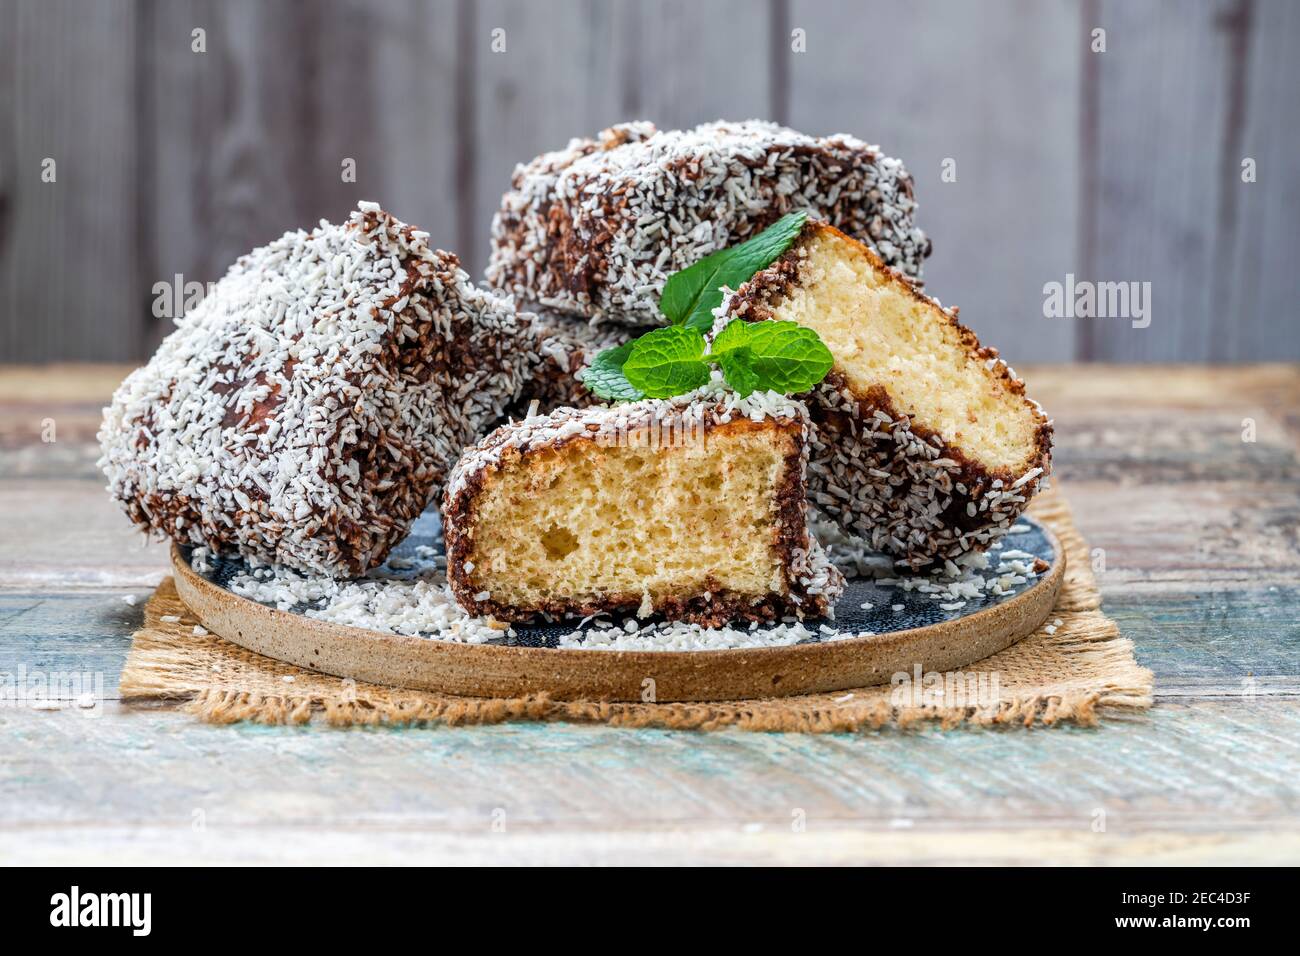 Lamington Cake coated in desiccated coconut Australia Stock Photo  Picture And Rights Managed Image Pic SFD281770  agefotostock